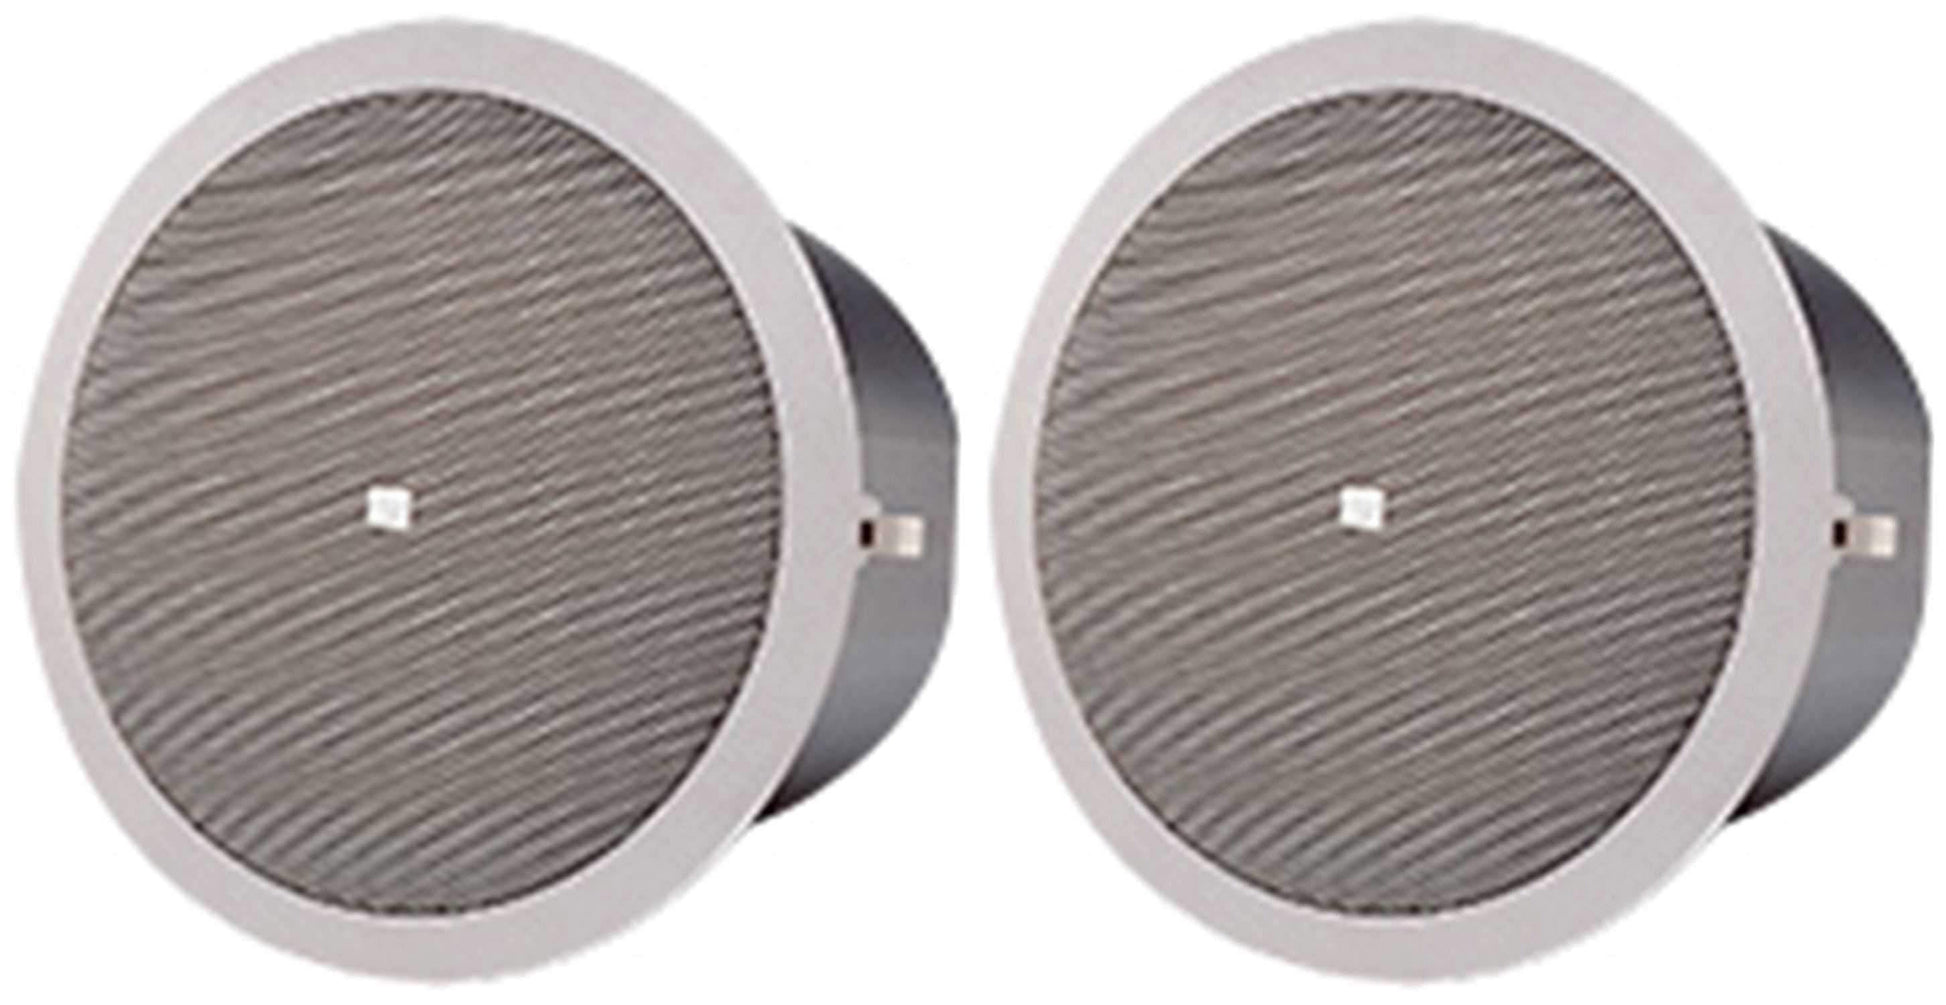 JBL CONTROL-19CS 8-Inch Ceiling Mount Subwoofer Pair - PSSL ProSound and Stage Lighting